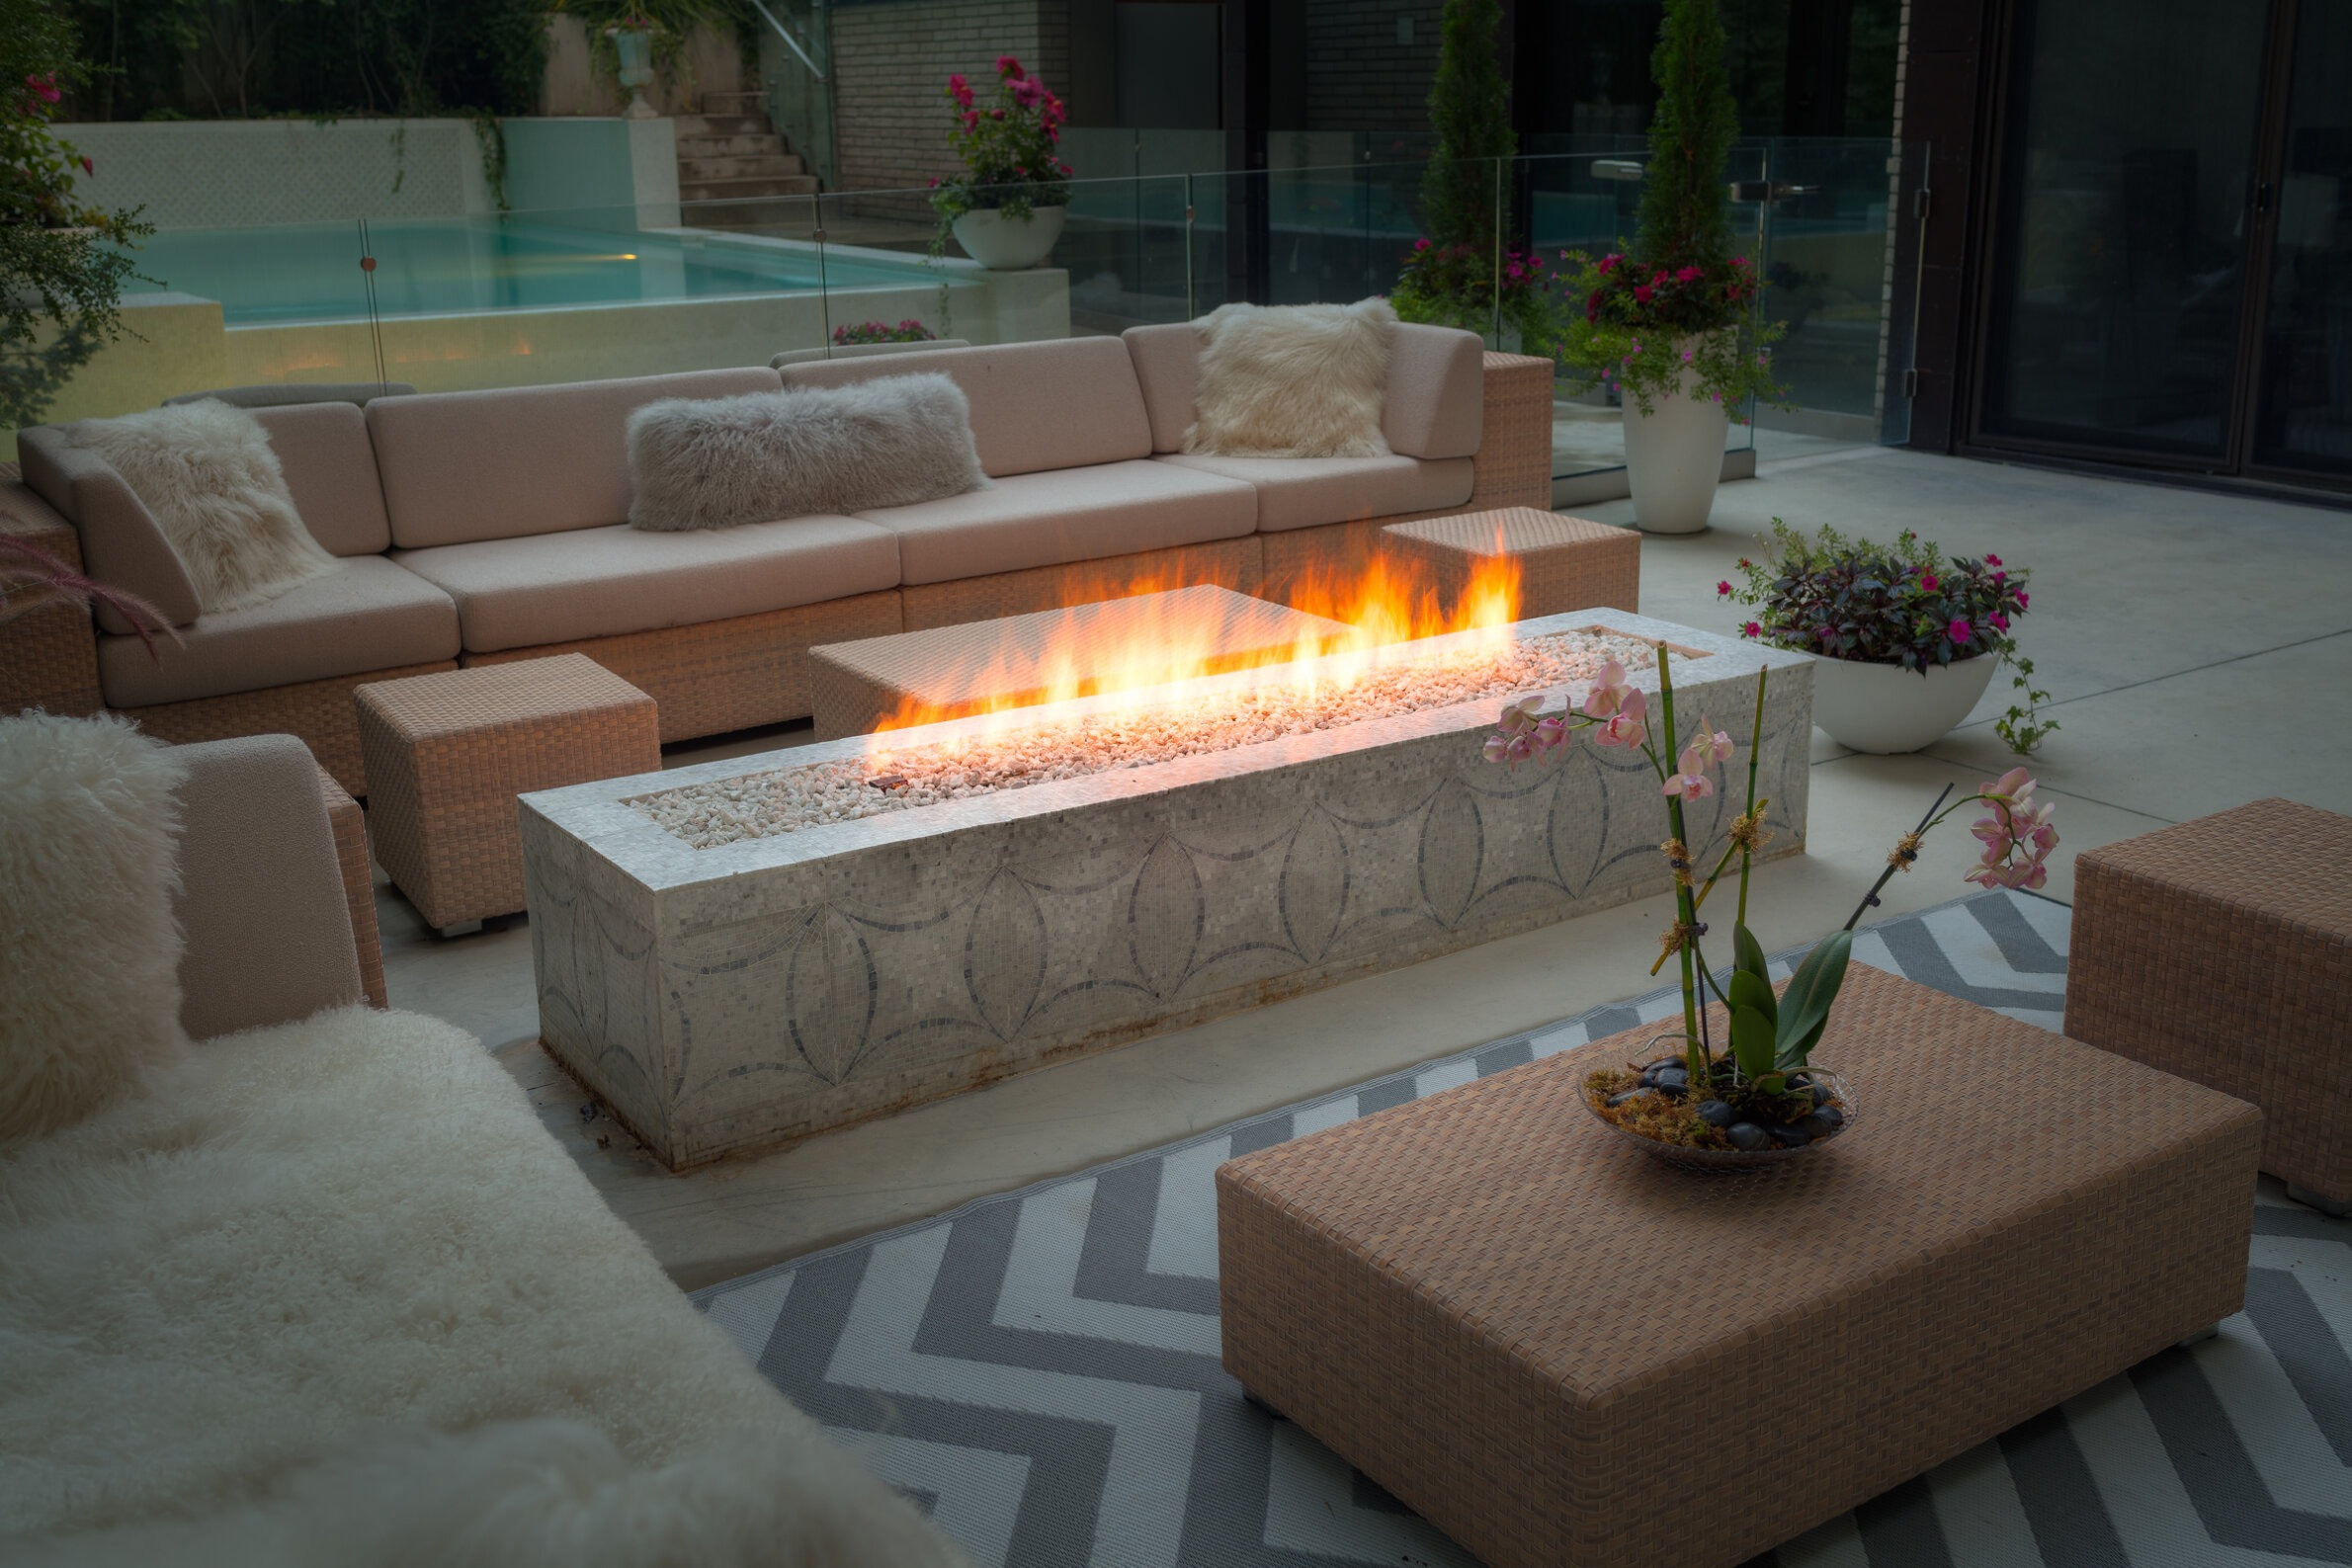 An outdoor patio area with a gas fireplace, cozy seating, patterned rug, potted plants, and a clear view over a calm swimming pool.